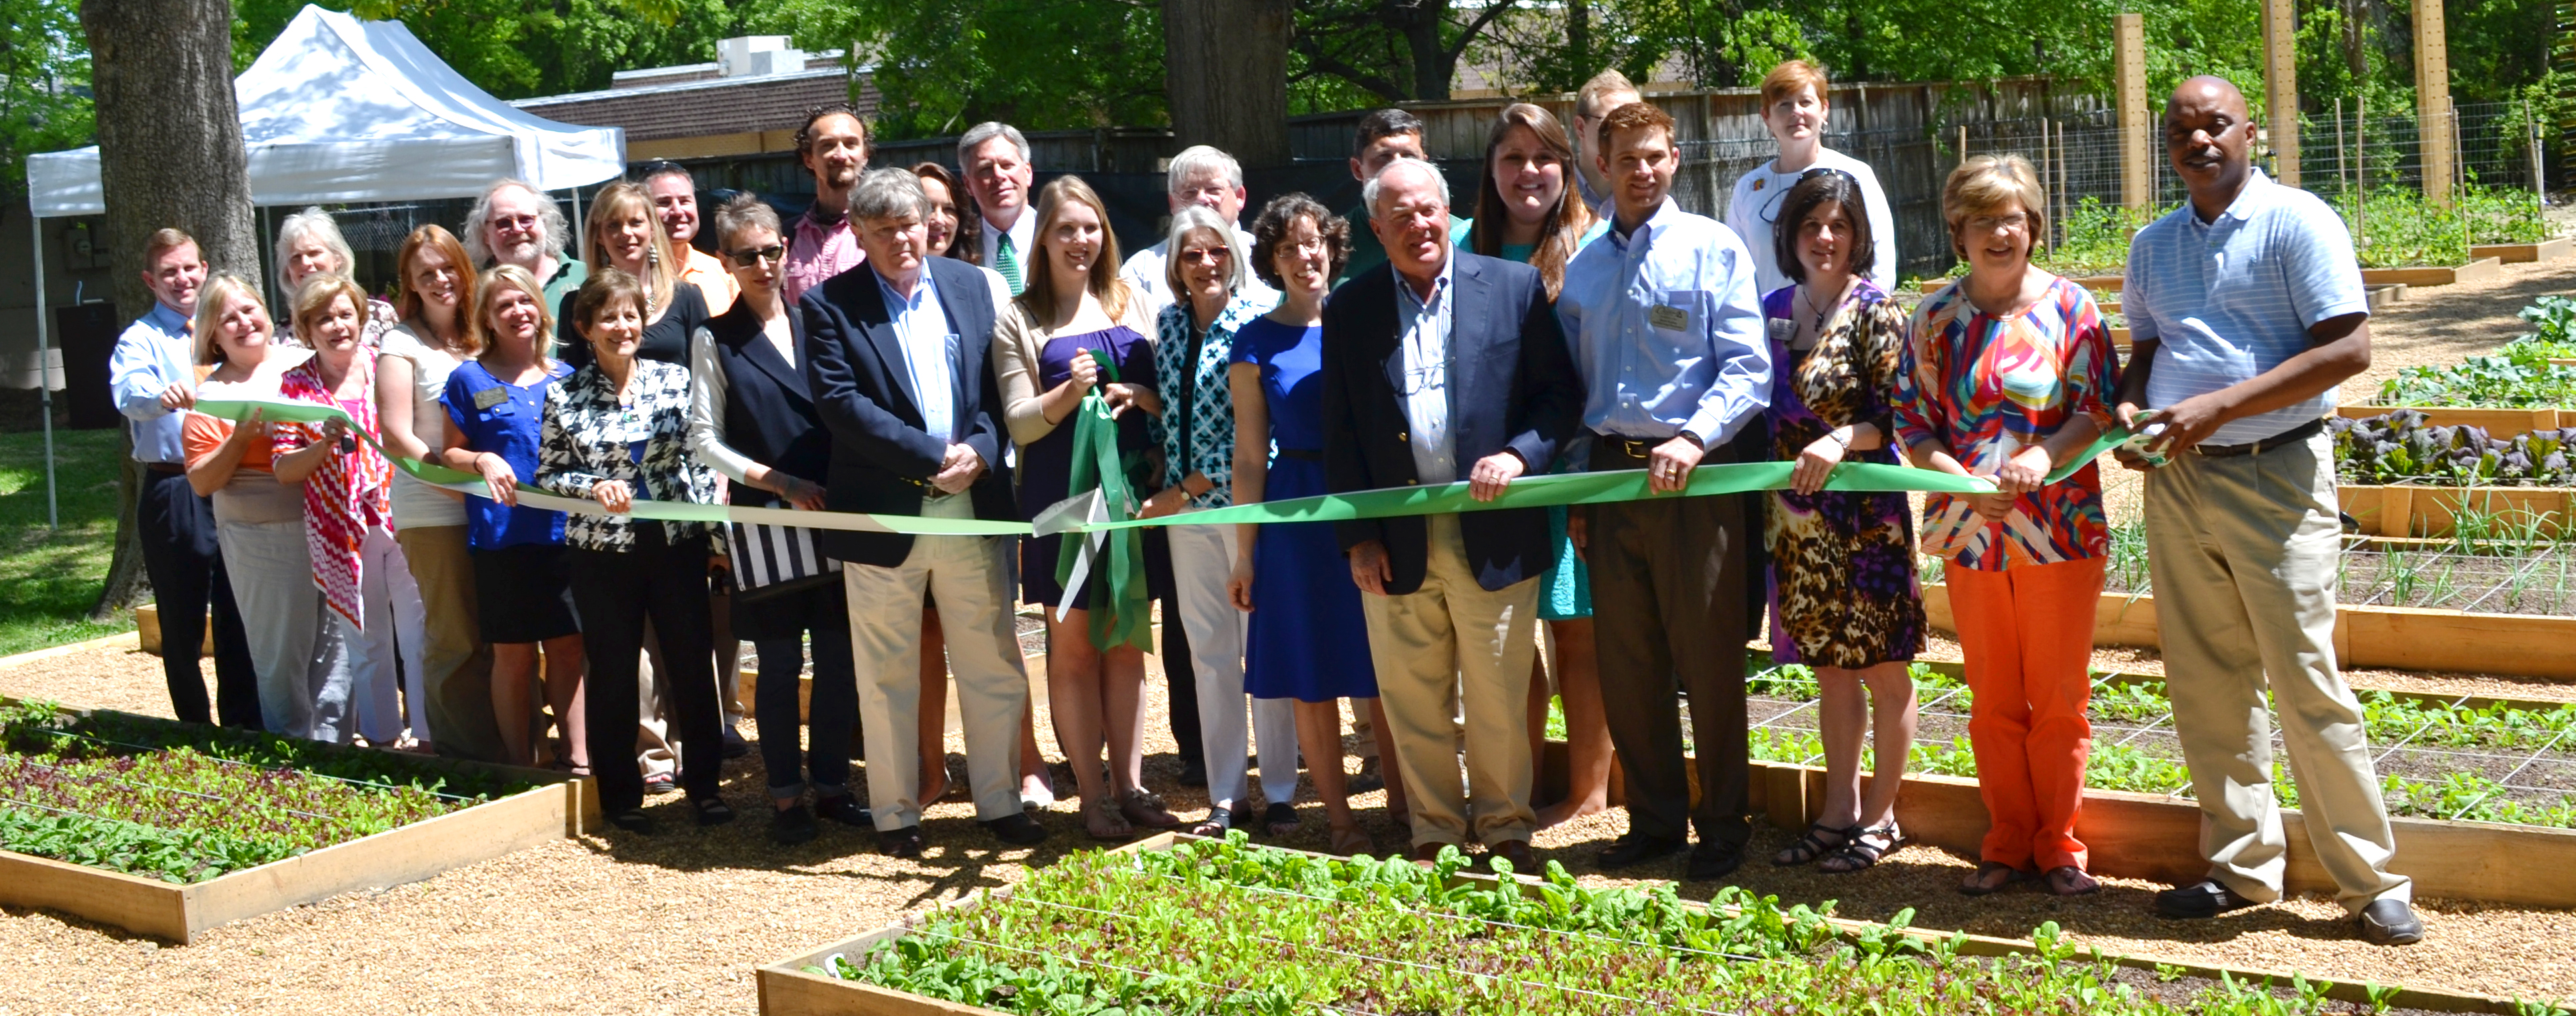 Community members, Delta State faculty and staff, students, Mayor Billy Nowell, and President LaForge and First Lady Nancy LaForge join together in the opening ceremony of Delta State Wiley Community Garden.